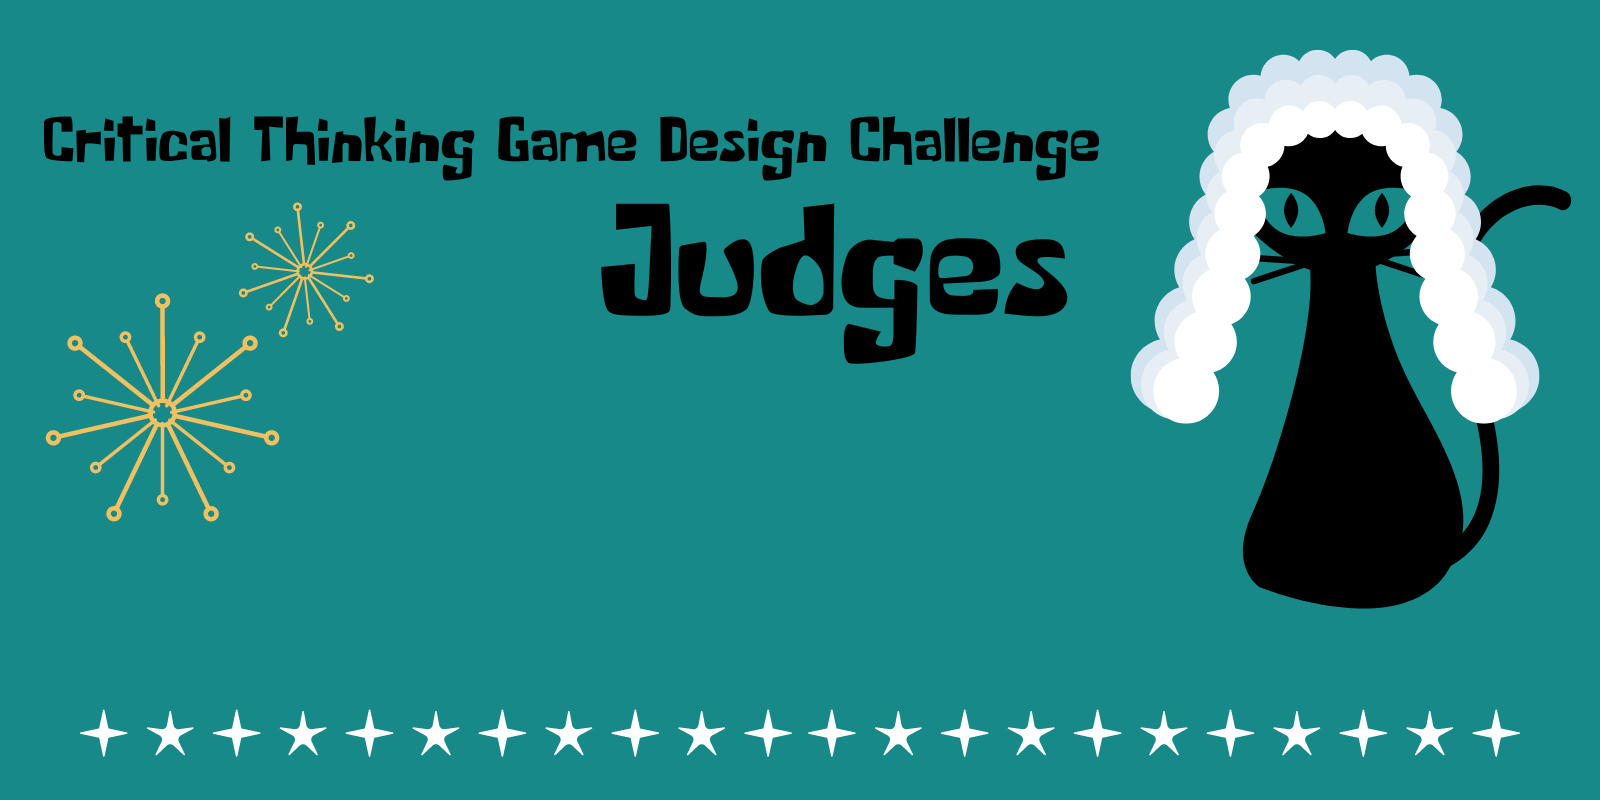 Critical Thinking cat, dressed for court, is pleased to announce the judges for the critical thinking game design challenge.